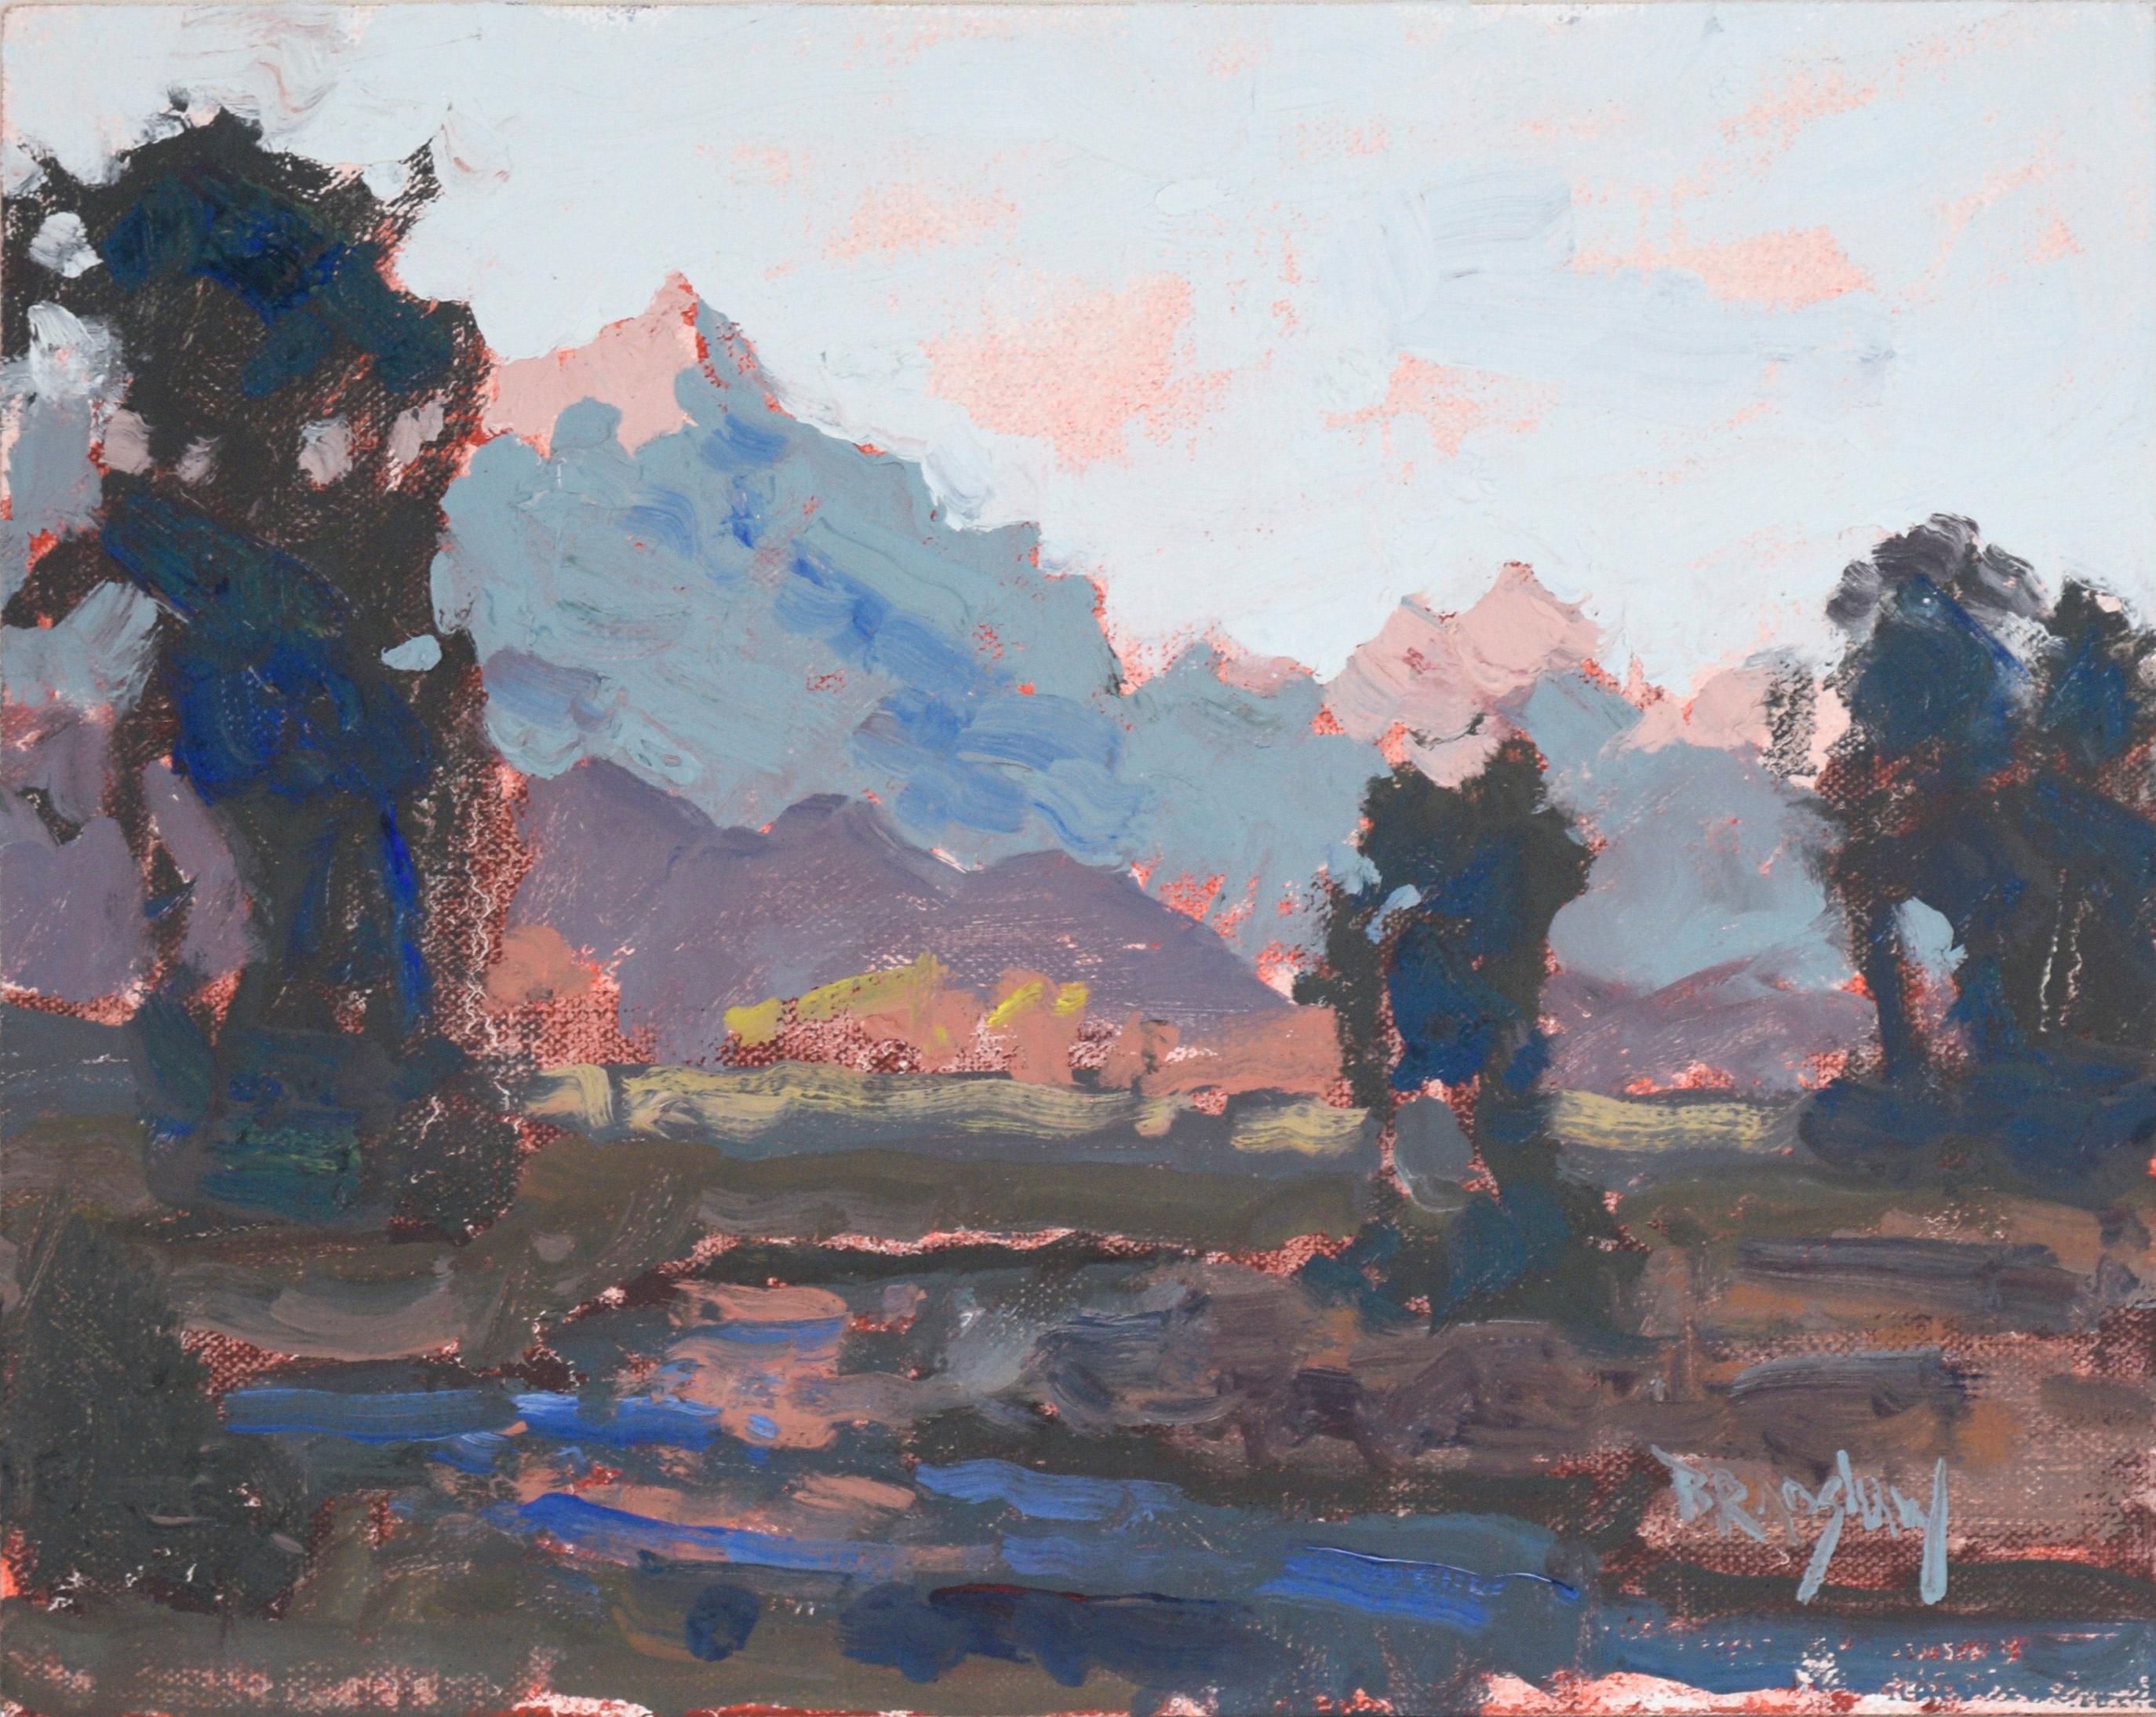 Thomas Bradshaw Landscape Painting - Sunset at Grand Teton National Park - Plein Aire Landscape in Oil on Board